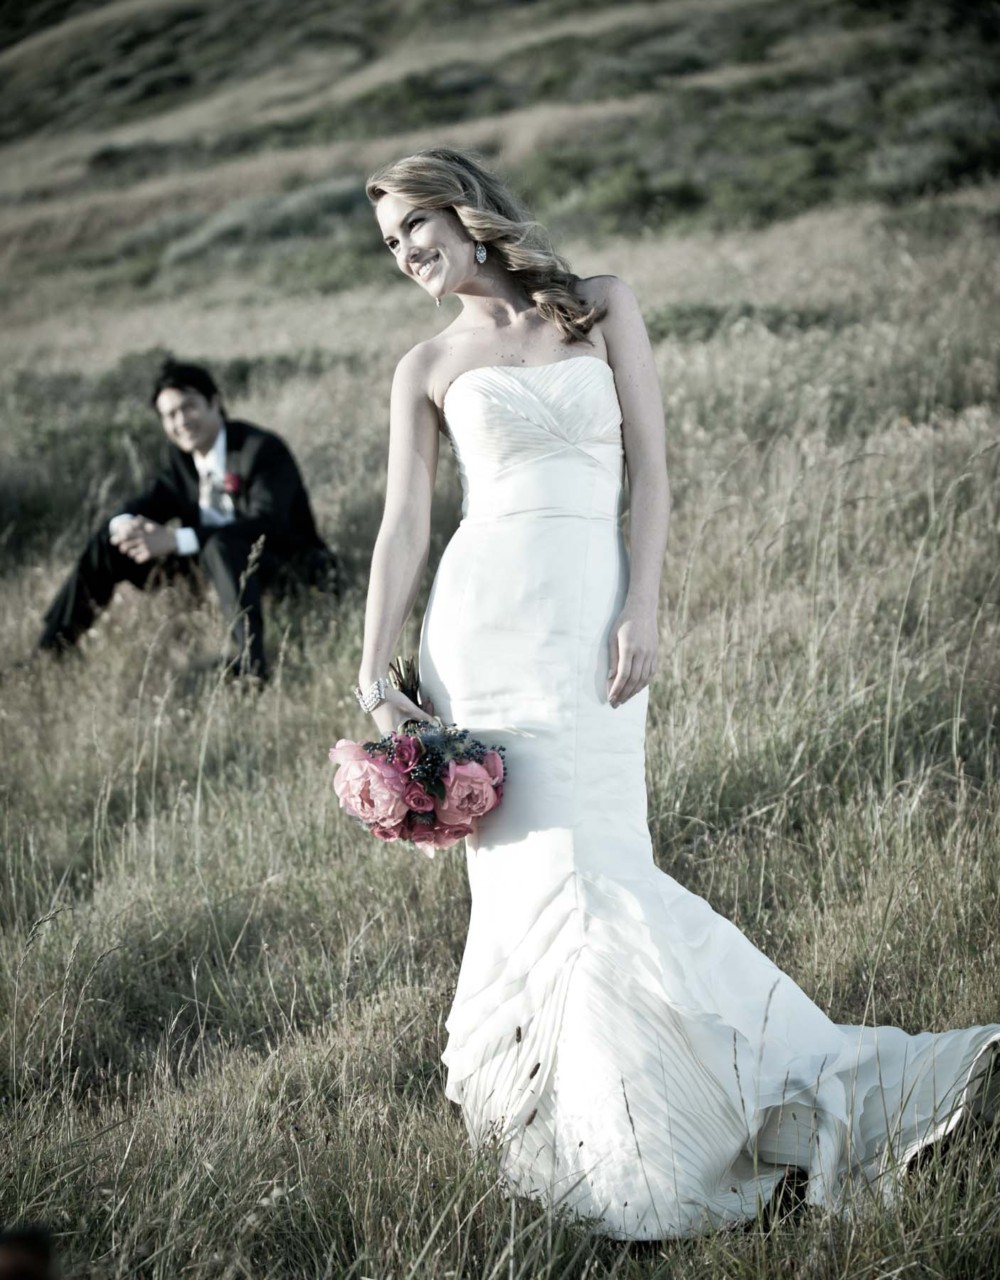 Looking for a top-rated wedding photographer in Girdwood?